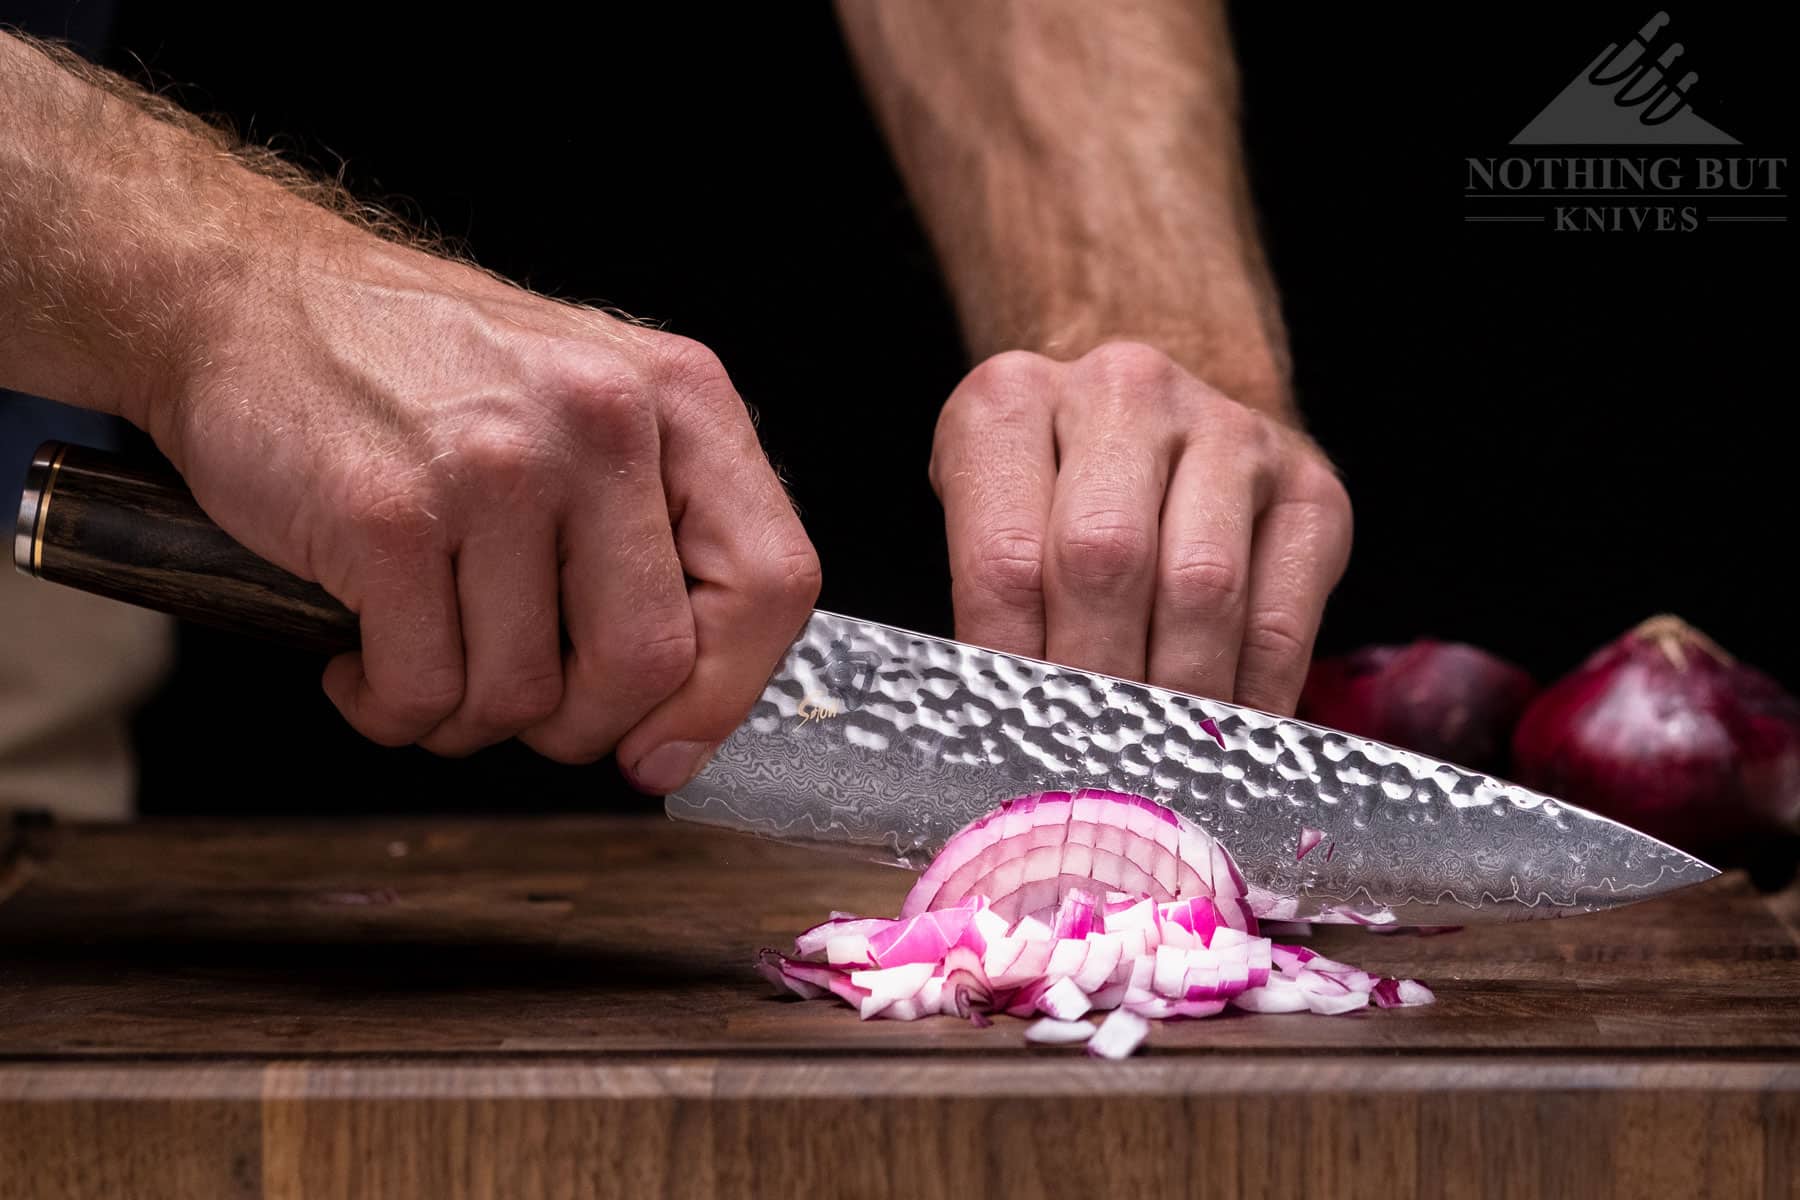 The Shun Premier chef knife makes dicing tasks fun and fast. 